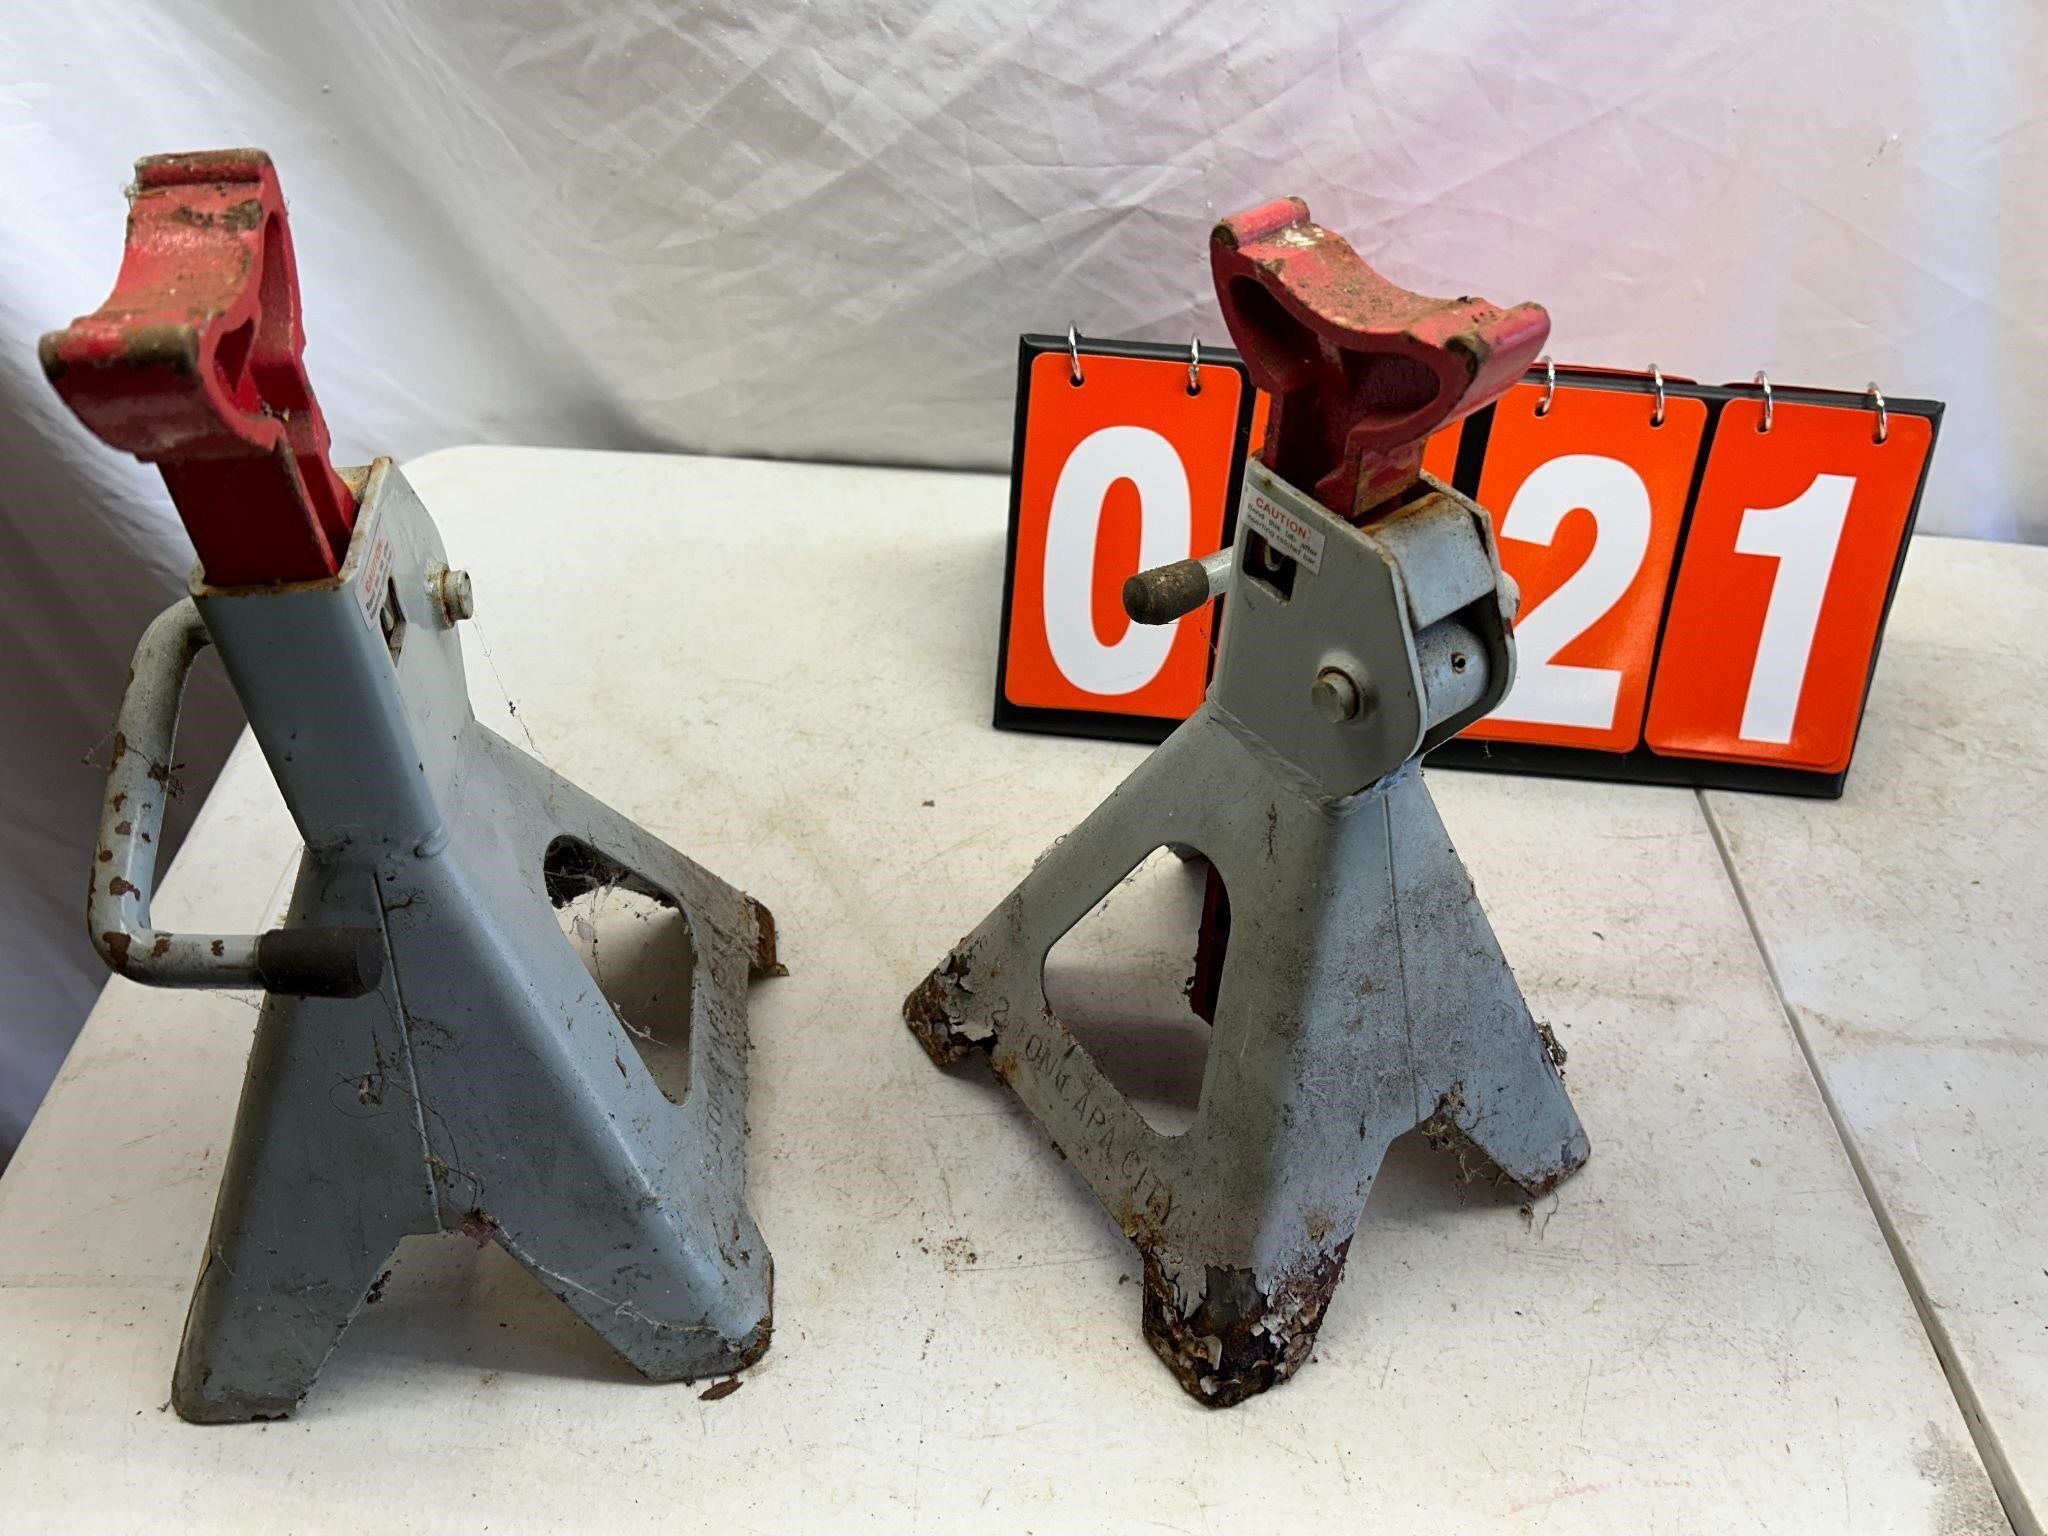 Pair of 2 Ton Jack Stands